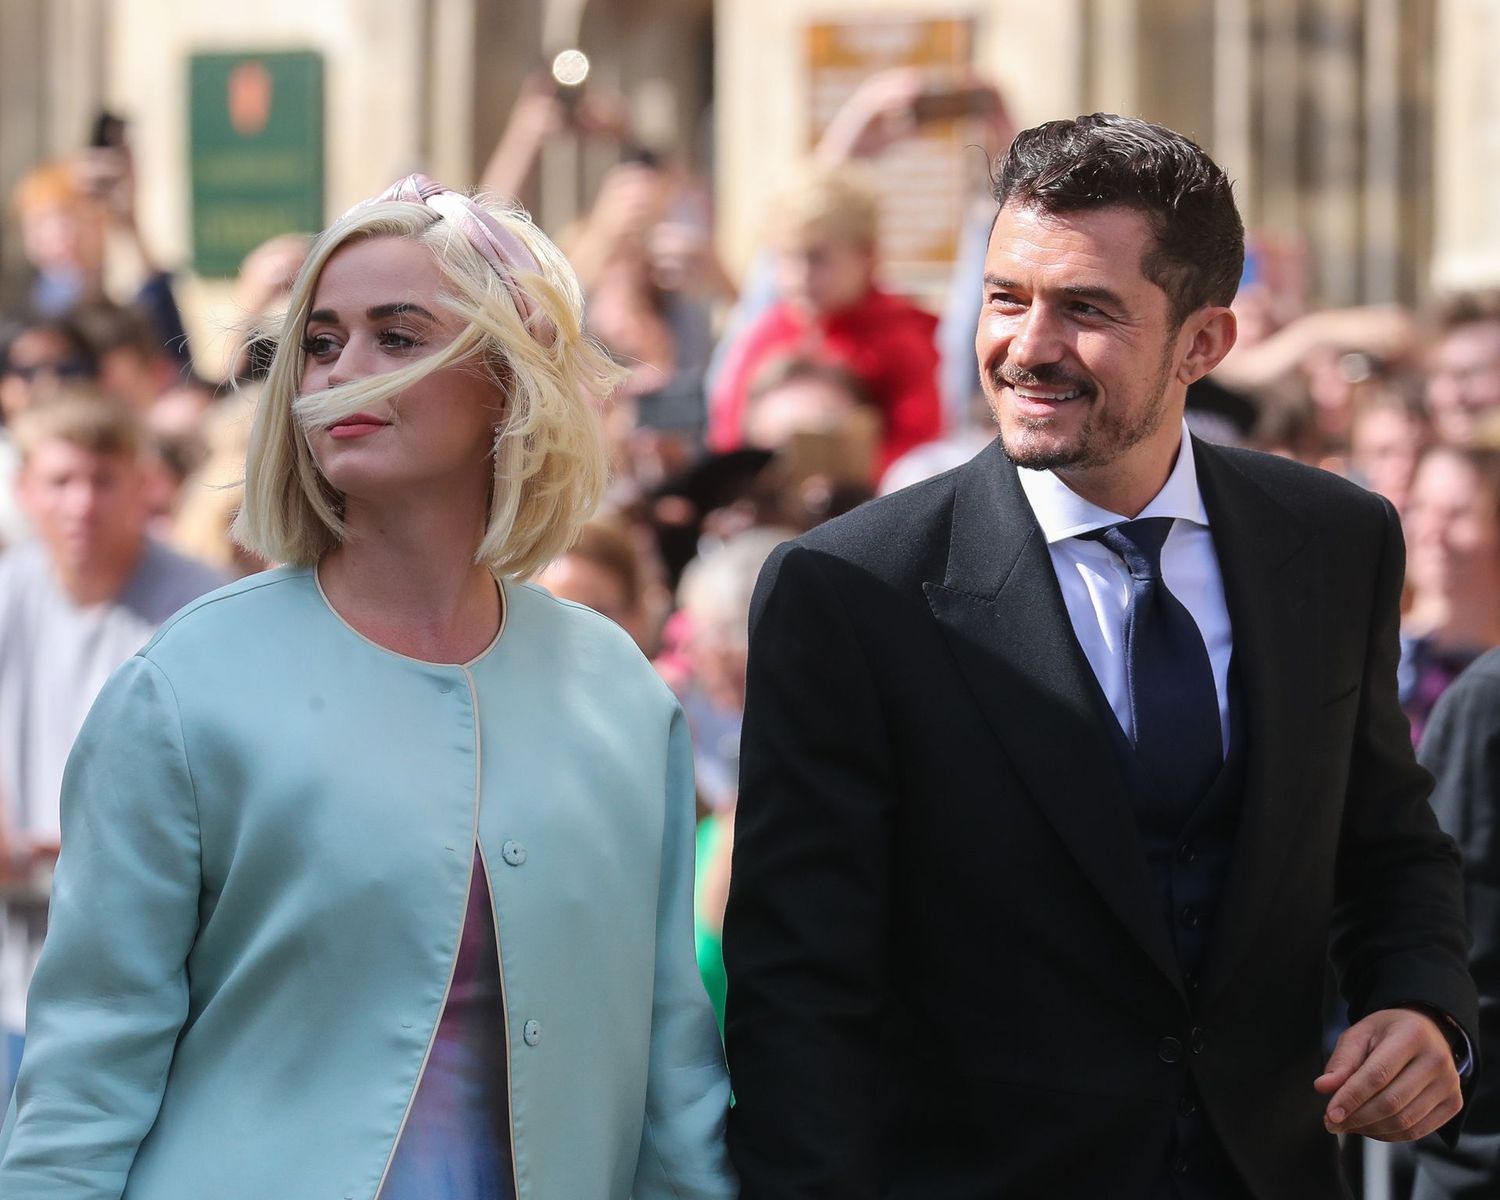 Katy Perry and Orlando Bloom at the wedding of Ellie Goulding and Caspar Jopling at York Minster Cathedral on August 31, 2019 | Photo: Getty Images